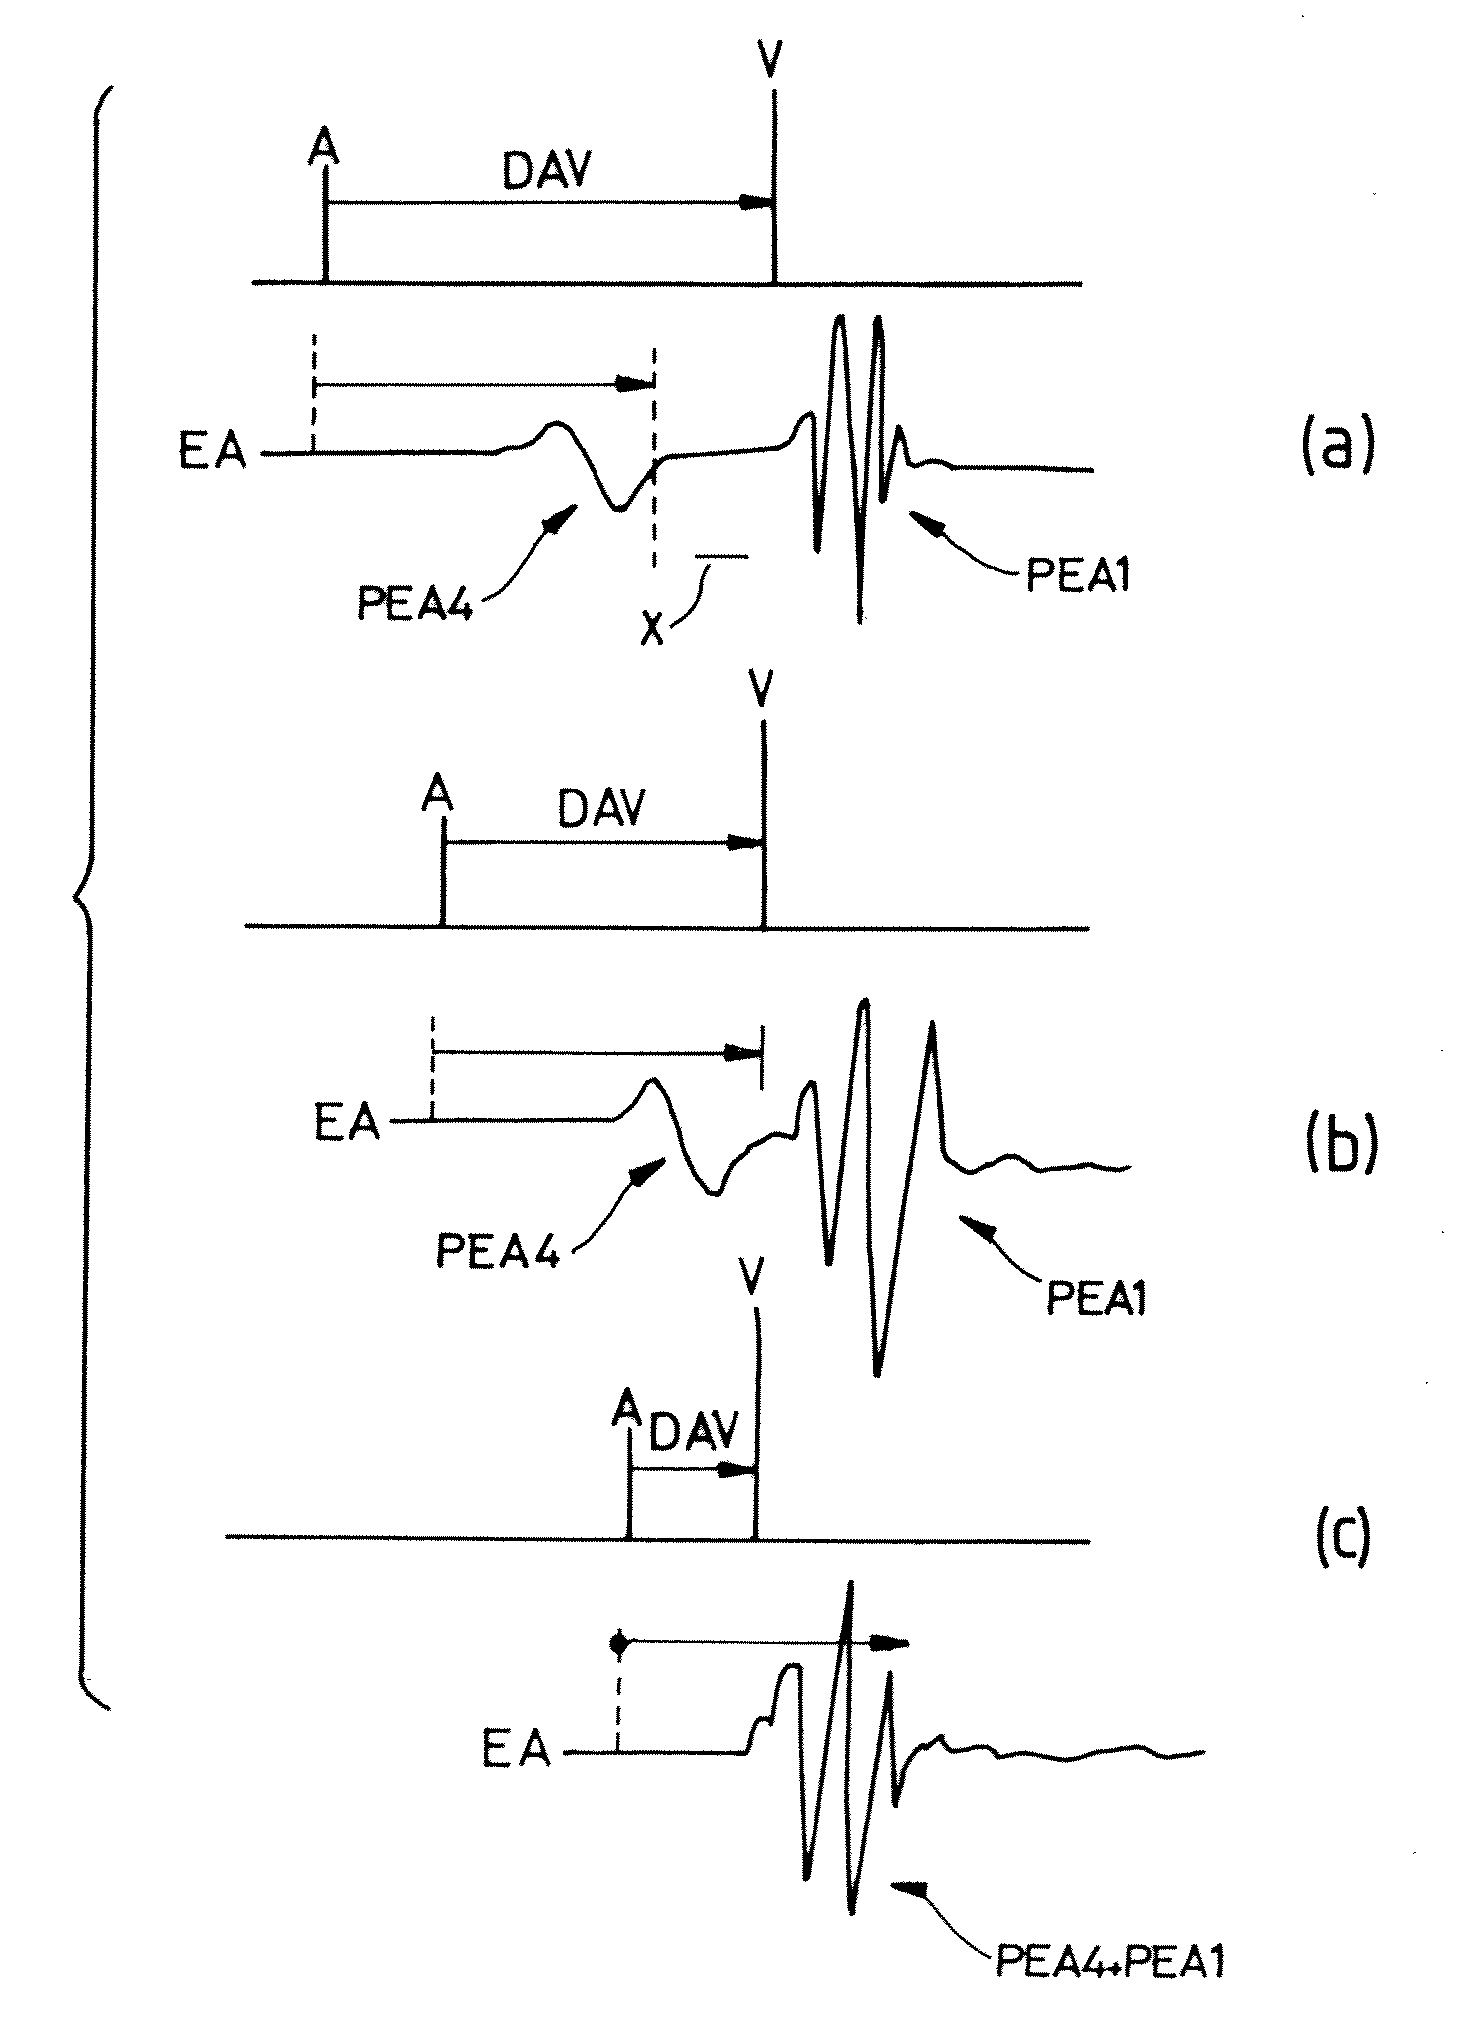 Calculation of the Atrioventricular Delay for an Active Implantable Metal Device